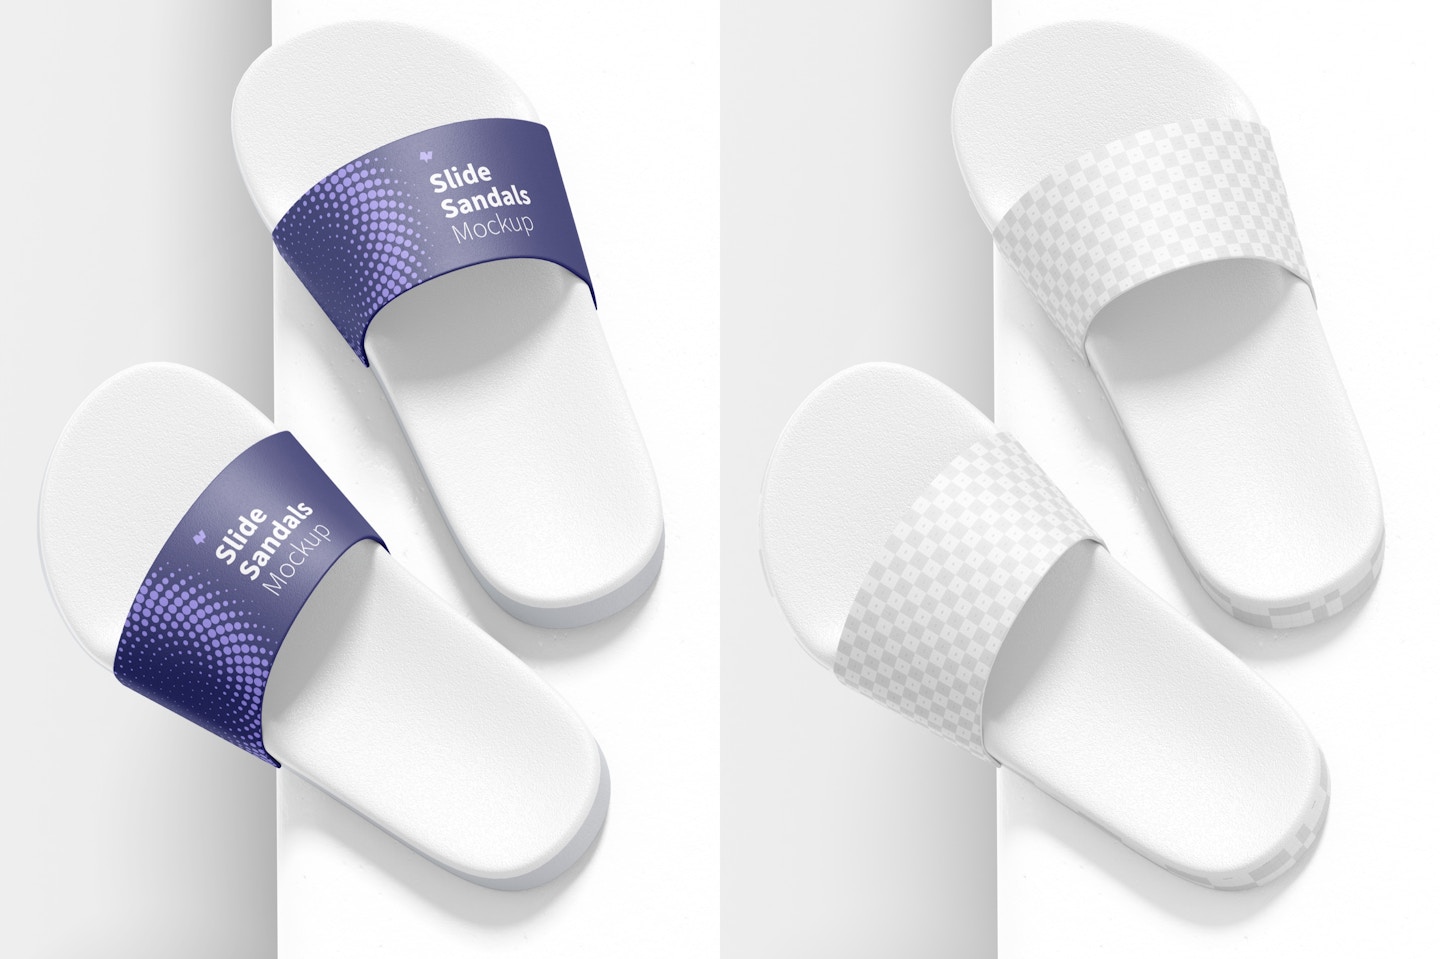 Slide Sandals Mockup, Right View